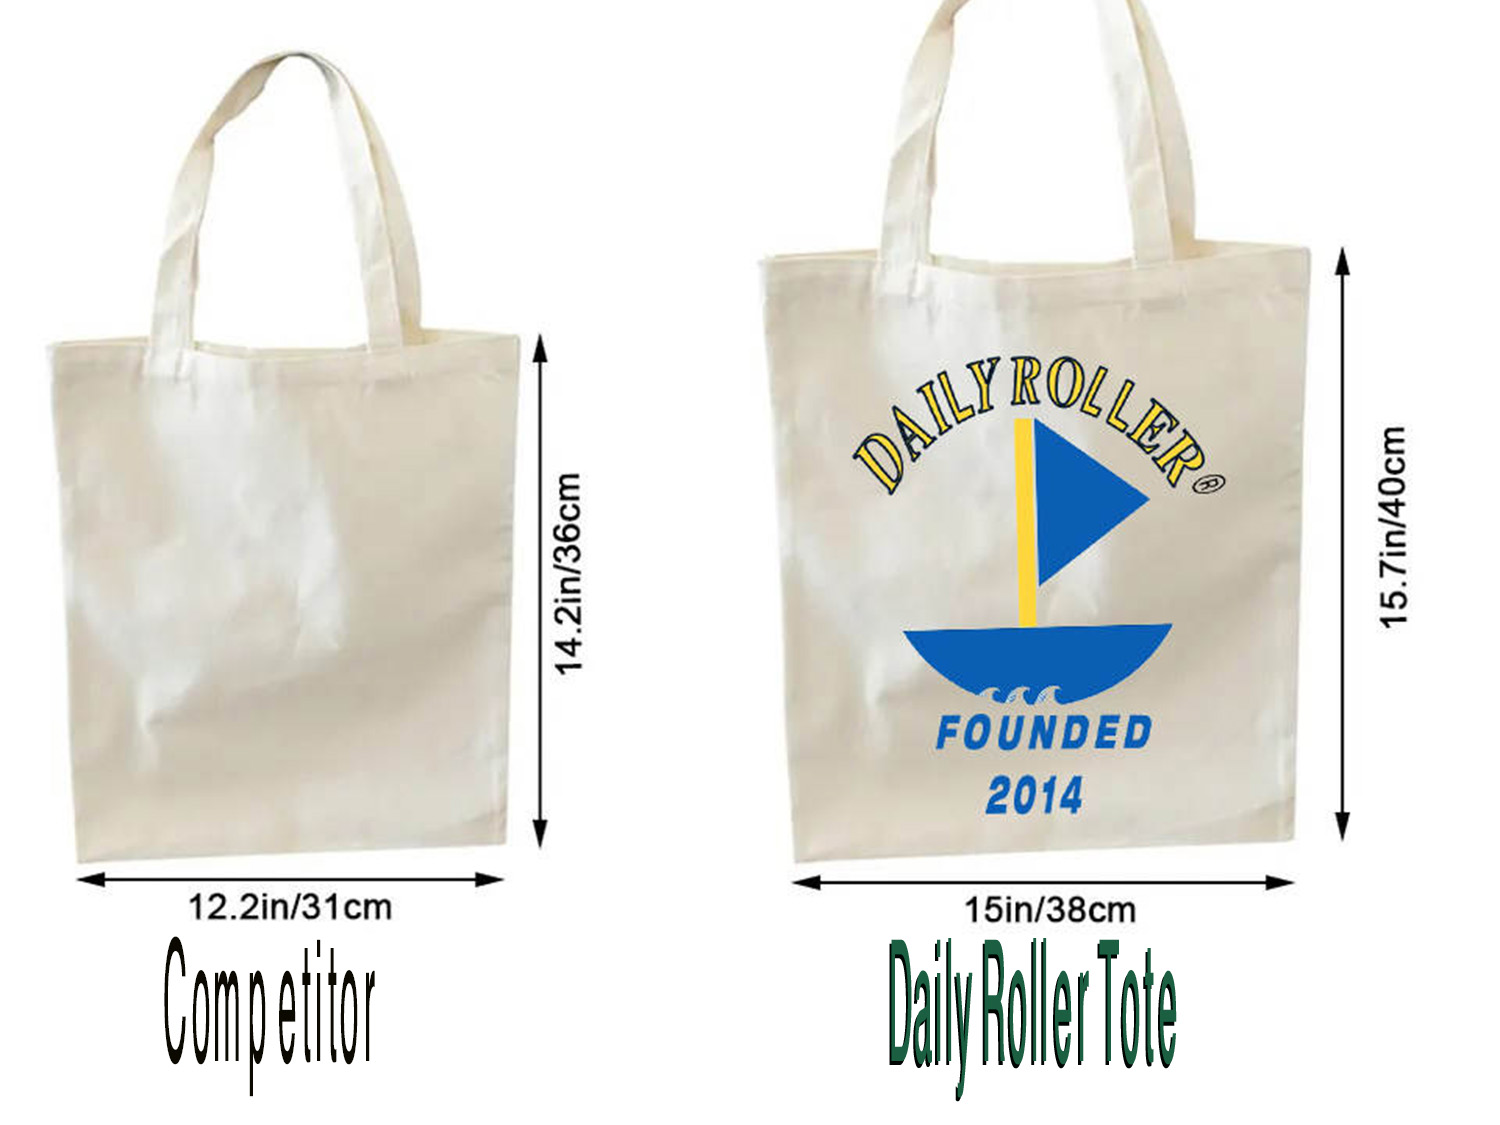 Daily Roller vs competitors tote bag size infographic